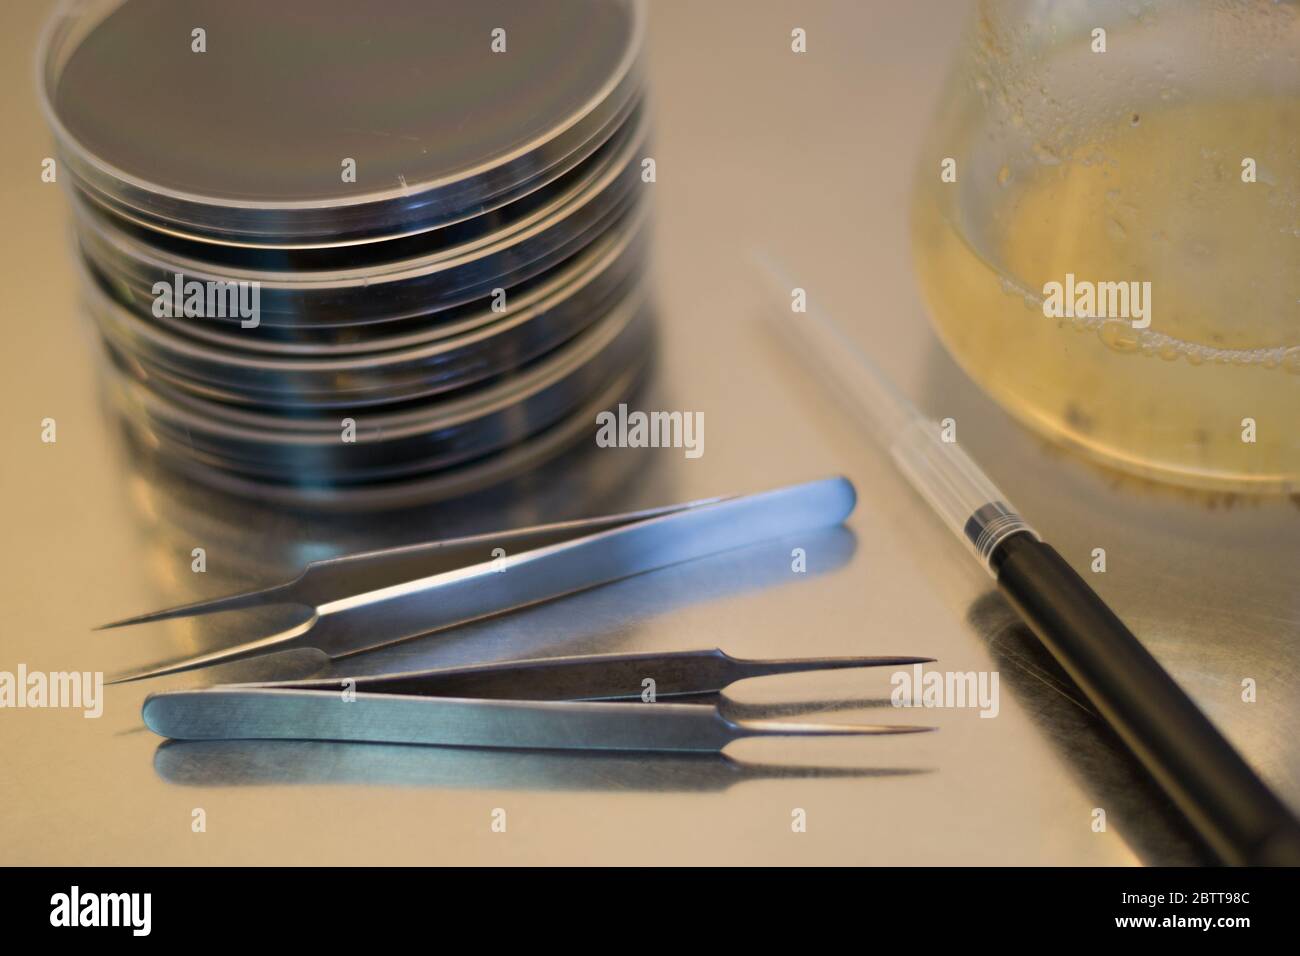 Material for a research in vitro experiment: petri dishes containing culture medium, forceps and micropipette Stock Photo